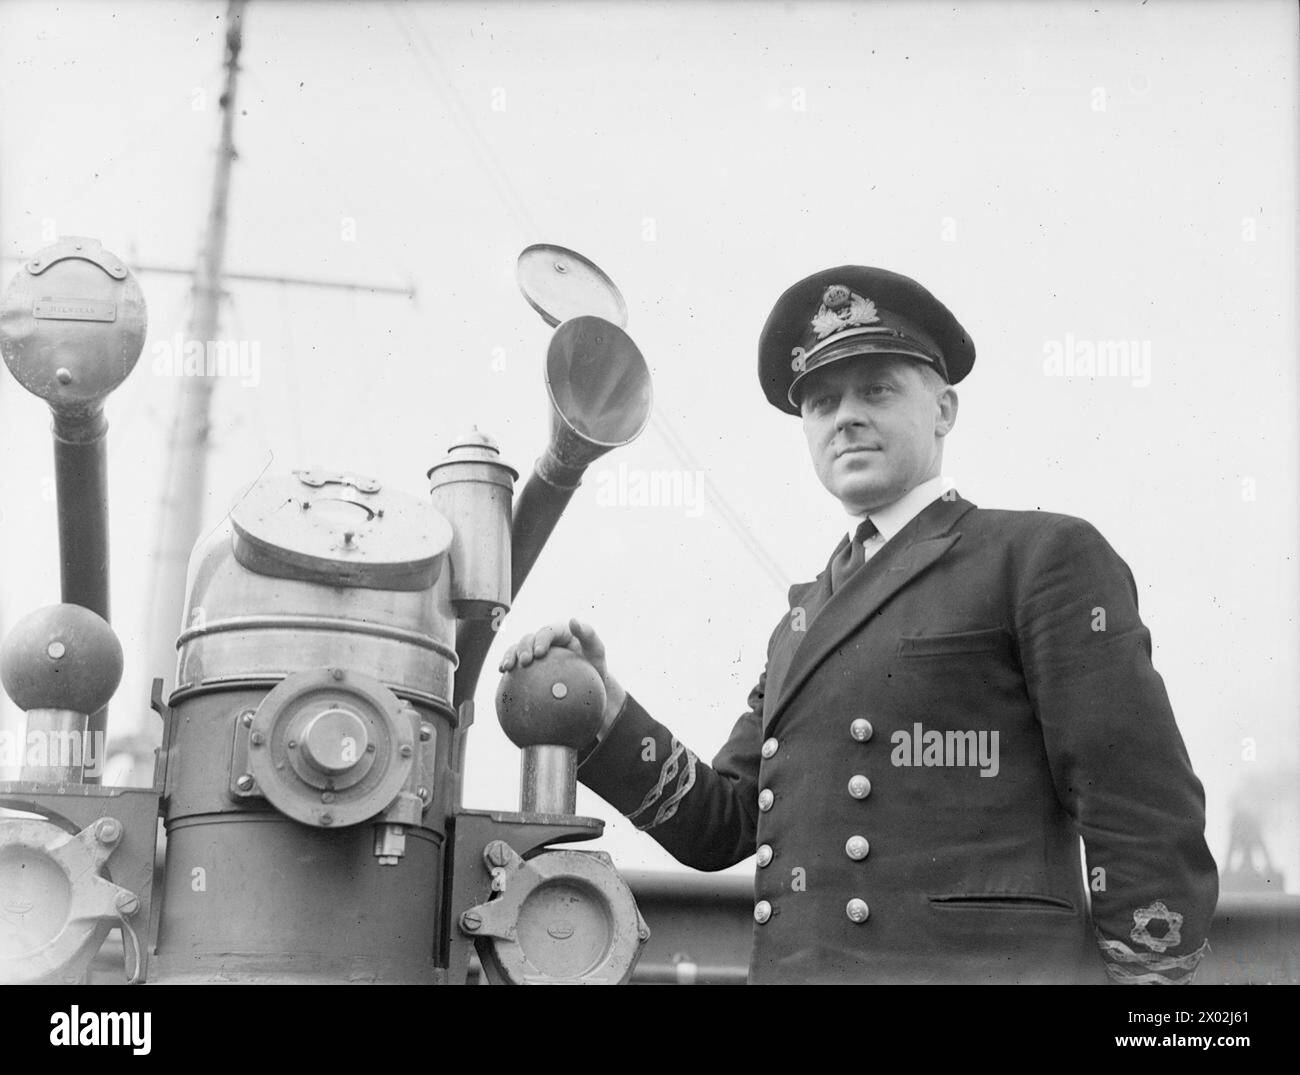 NORTHERN WAVE SKIPPER GUNNED GERMAN TANKS AT CALAIS. 16 AUGUST 1943, LIVERPOOL. LIEUT J P KILBEE, RNR, OF FOLKESTONE, NOW SKIPPER OF HMS NORTHERN WAVE, WAS CHIEF MATE ABOARD THE MOTOR FERRY AUTOCARRIER RUNNING THE TROOPS AND VEHICLES FROM FOLKESTONE TO CALAIS. WHEN GERMAN TANKS ARRIVED AT CALAIS THE AUTOCARRIER OPENED UP ON THEM WITH HER 12 POUNDER AND LEWIS GUN. LIEUT KILBEE IS NOW IN COMMAND OF THE LARGE GERMAN BUILT TRAWLER NORTHERN WAVE. - Lieut J P Kilbee, RNR, Commanding Officer of the NORTHERN WAVE Stock Photo